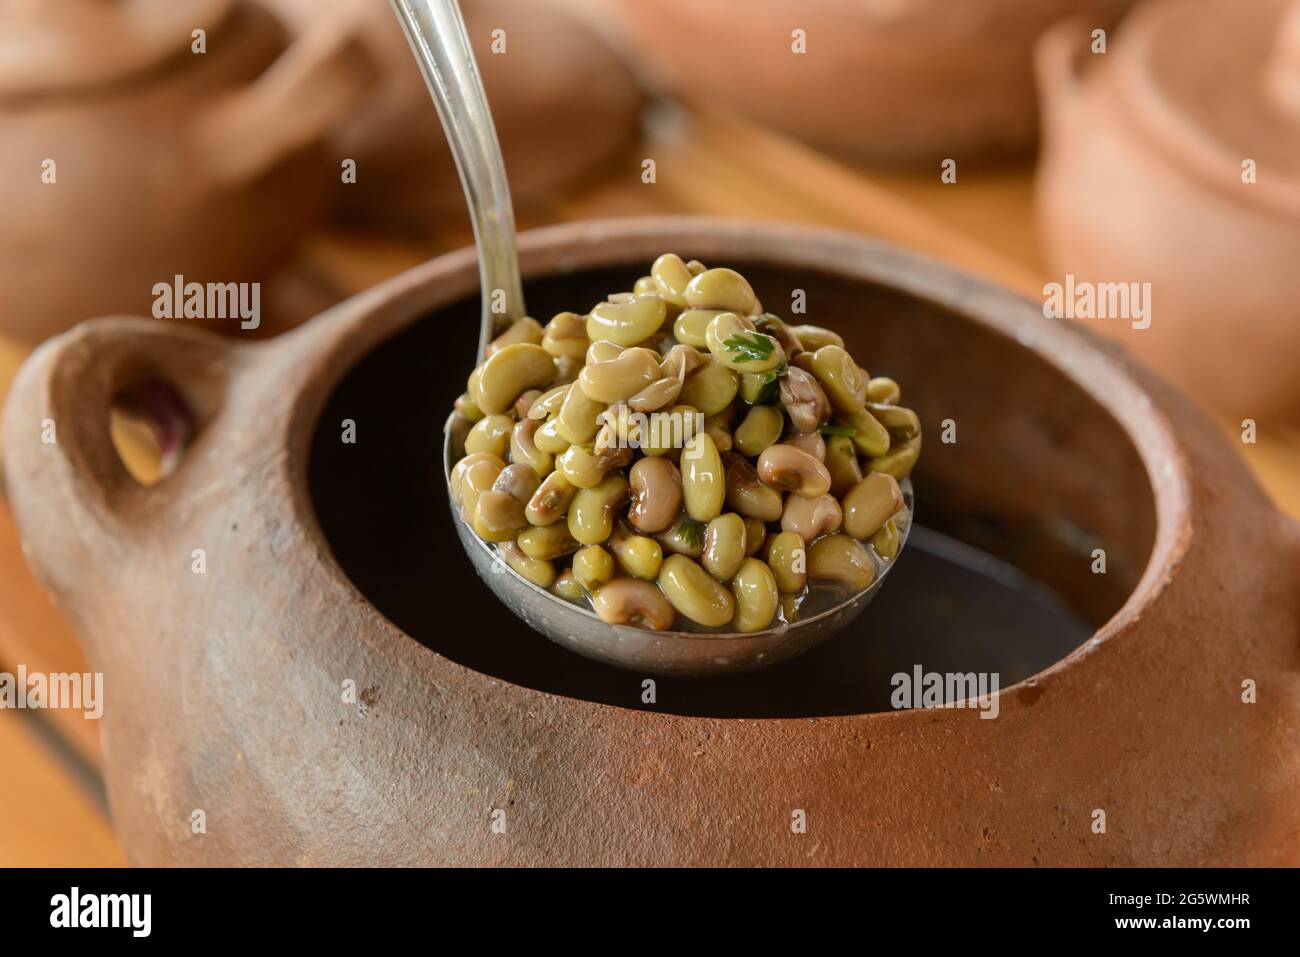 Green beans with blurred clay pots in the background. Traditional cuisine from northeastern Brazil. Stock Photo